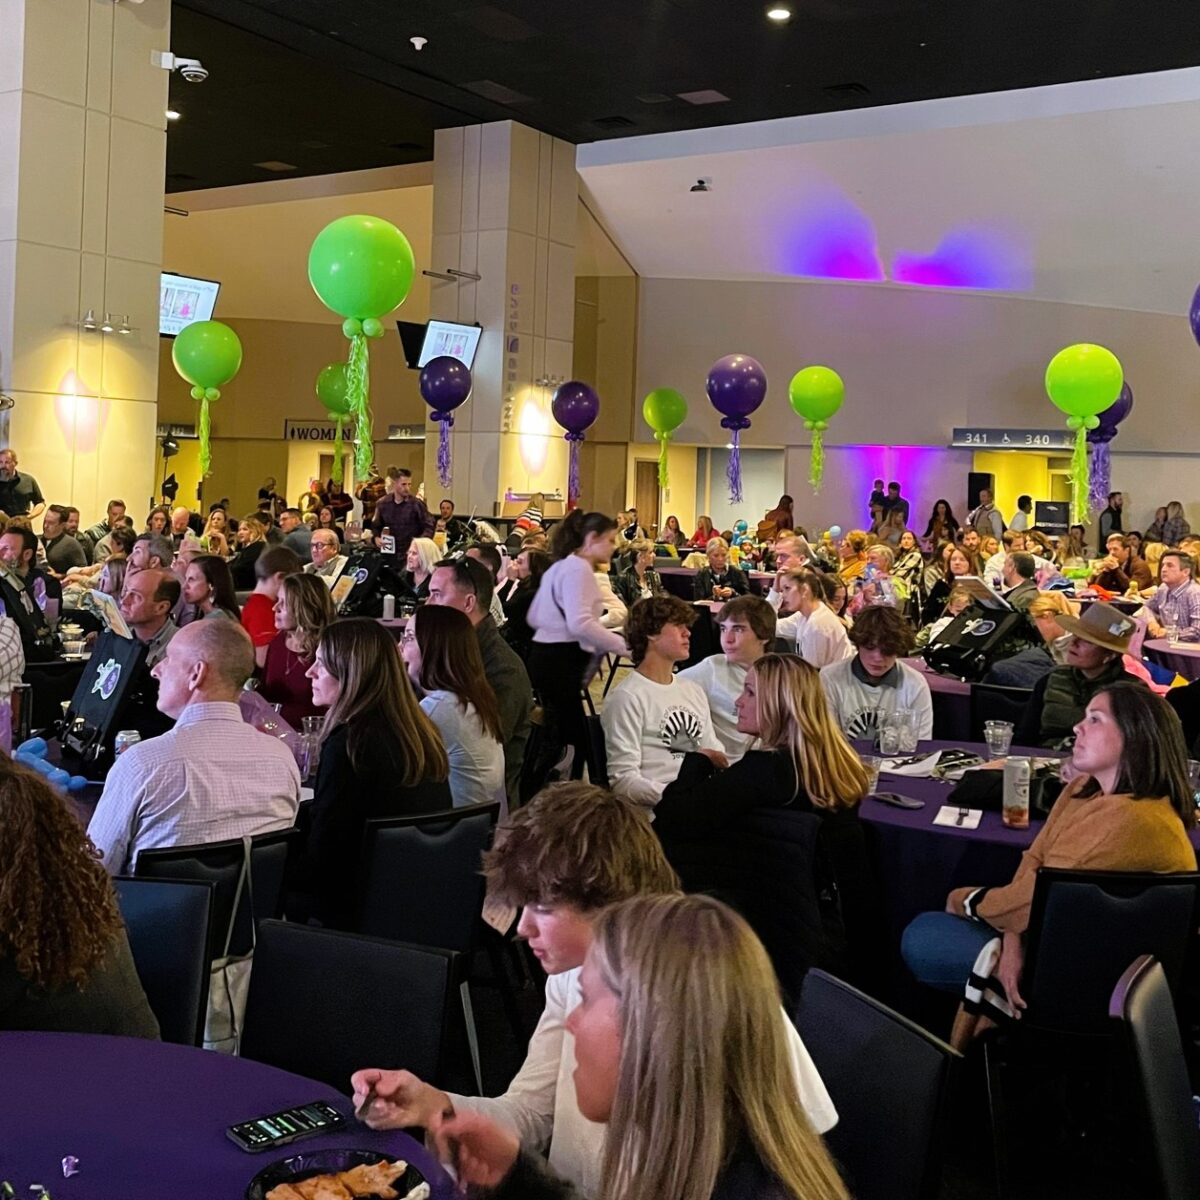 Lots of people sitting at round tables eating and talking at the event. There are green and purple balloons all around as well.